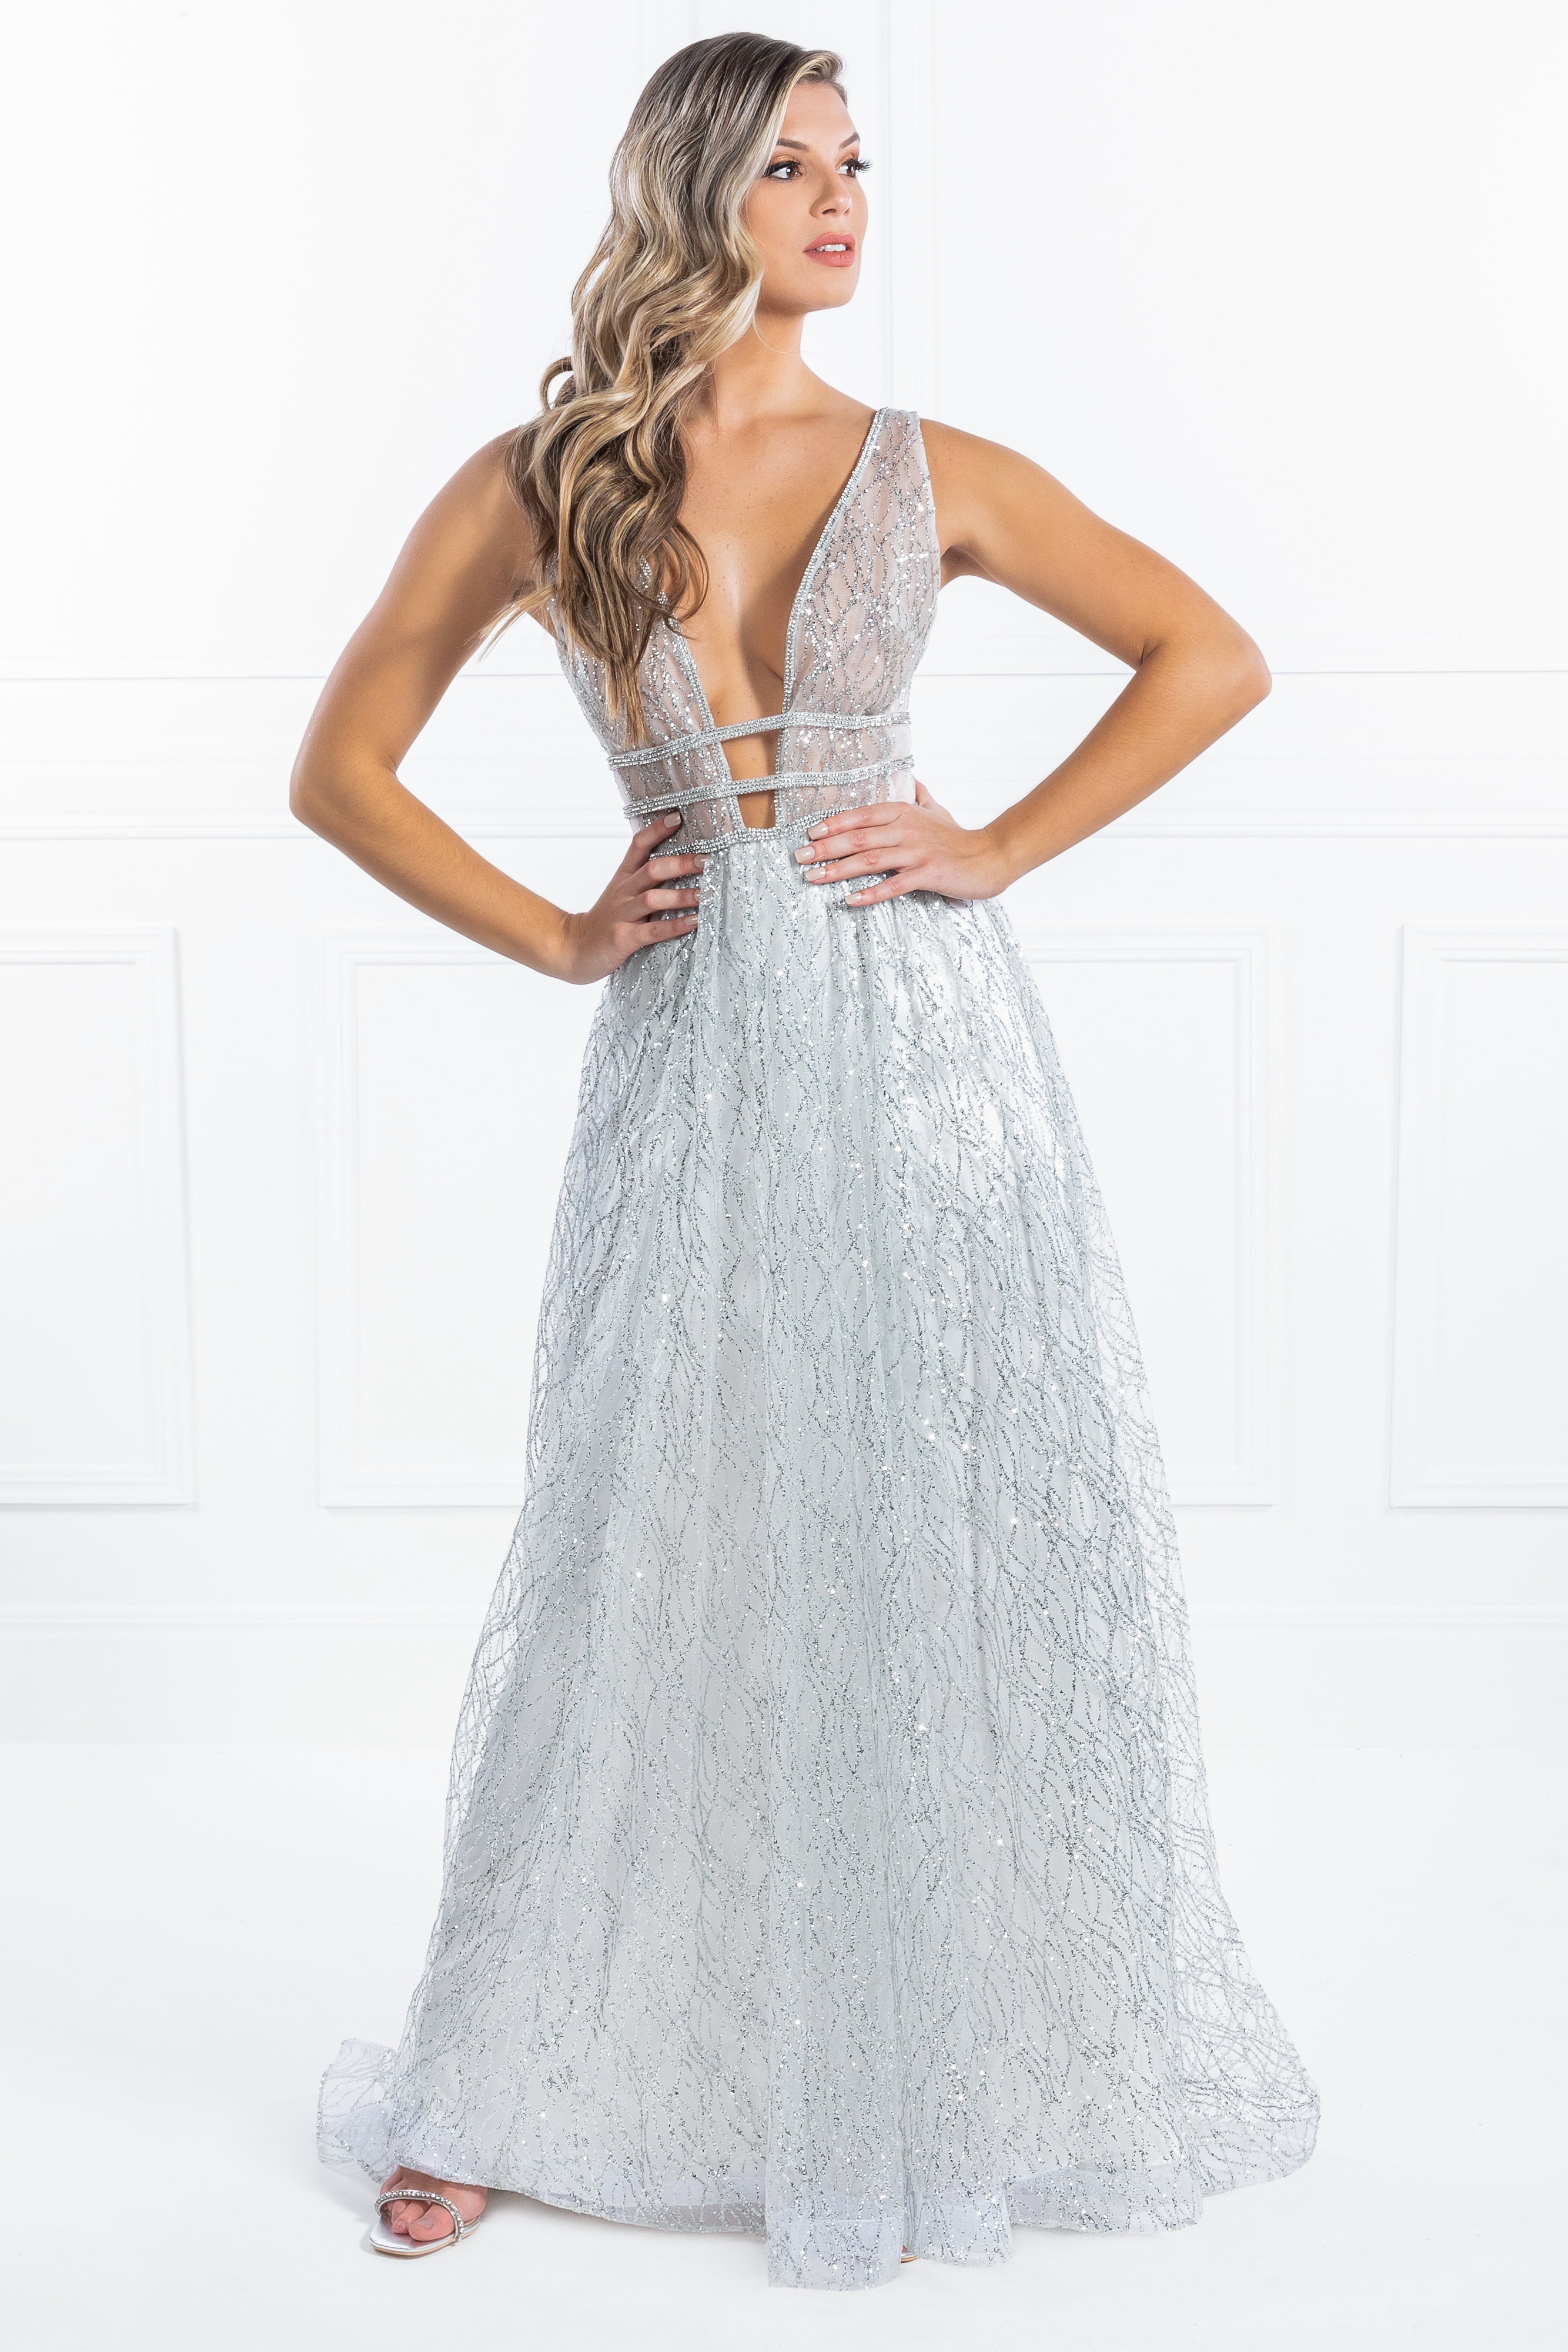 Honey Couture ENYA White & Silver Glitter Formal Gown